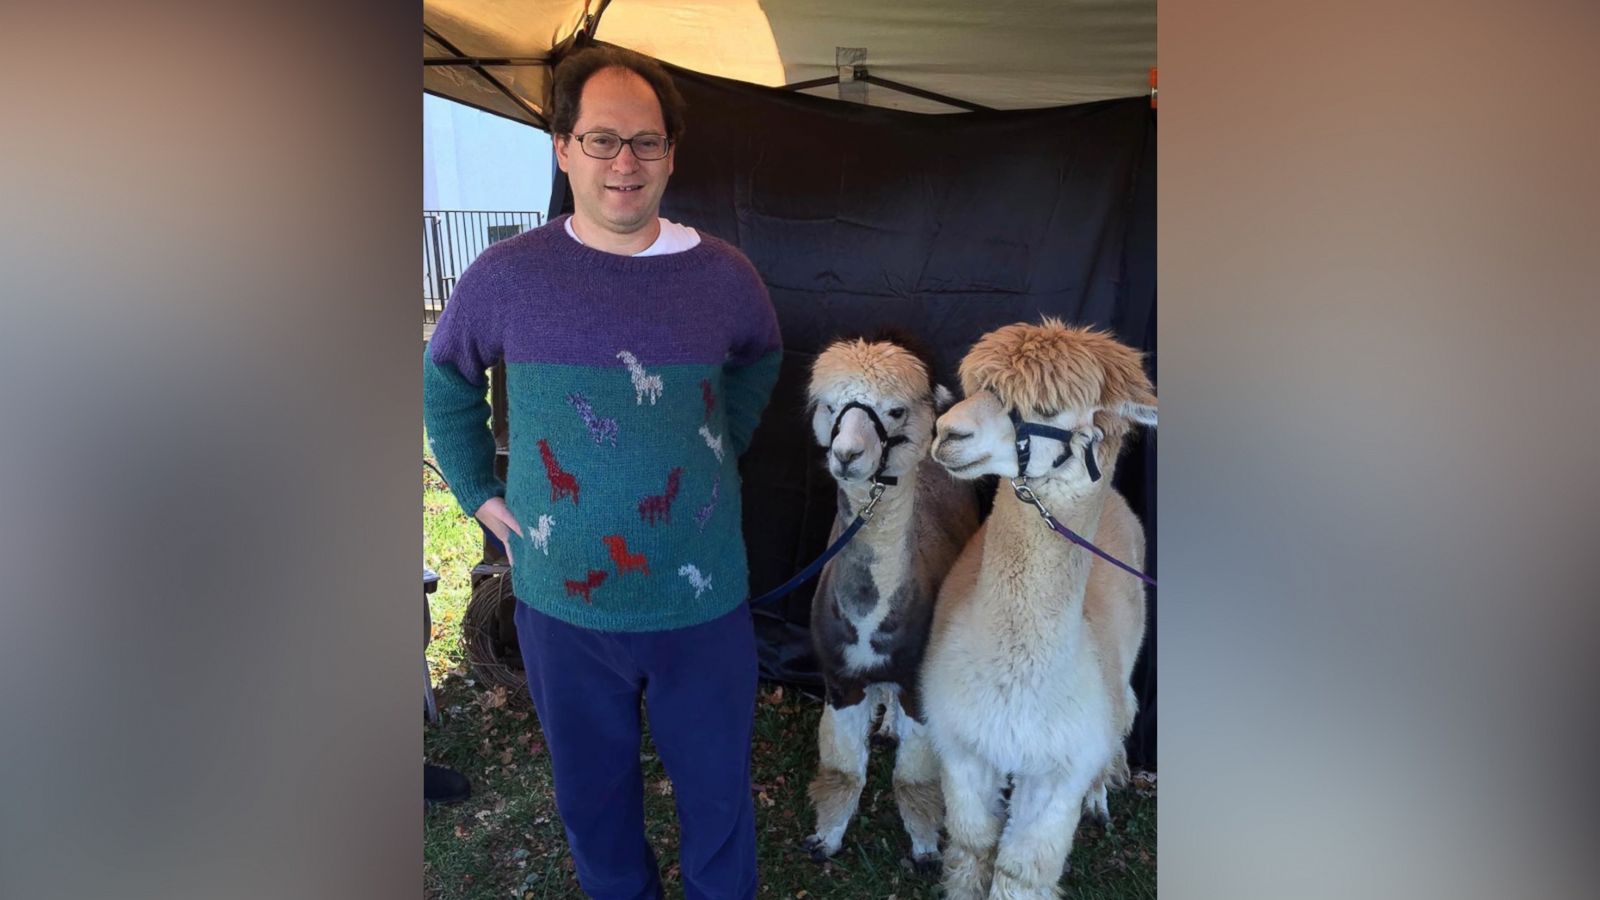 PHOTO: Sam Barsky knits sweaters of famous places and landmarks, and then visits those places decked out his matching sweaters.